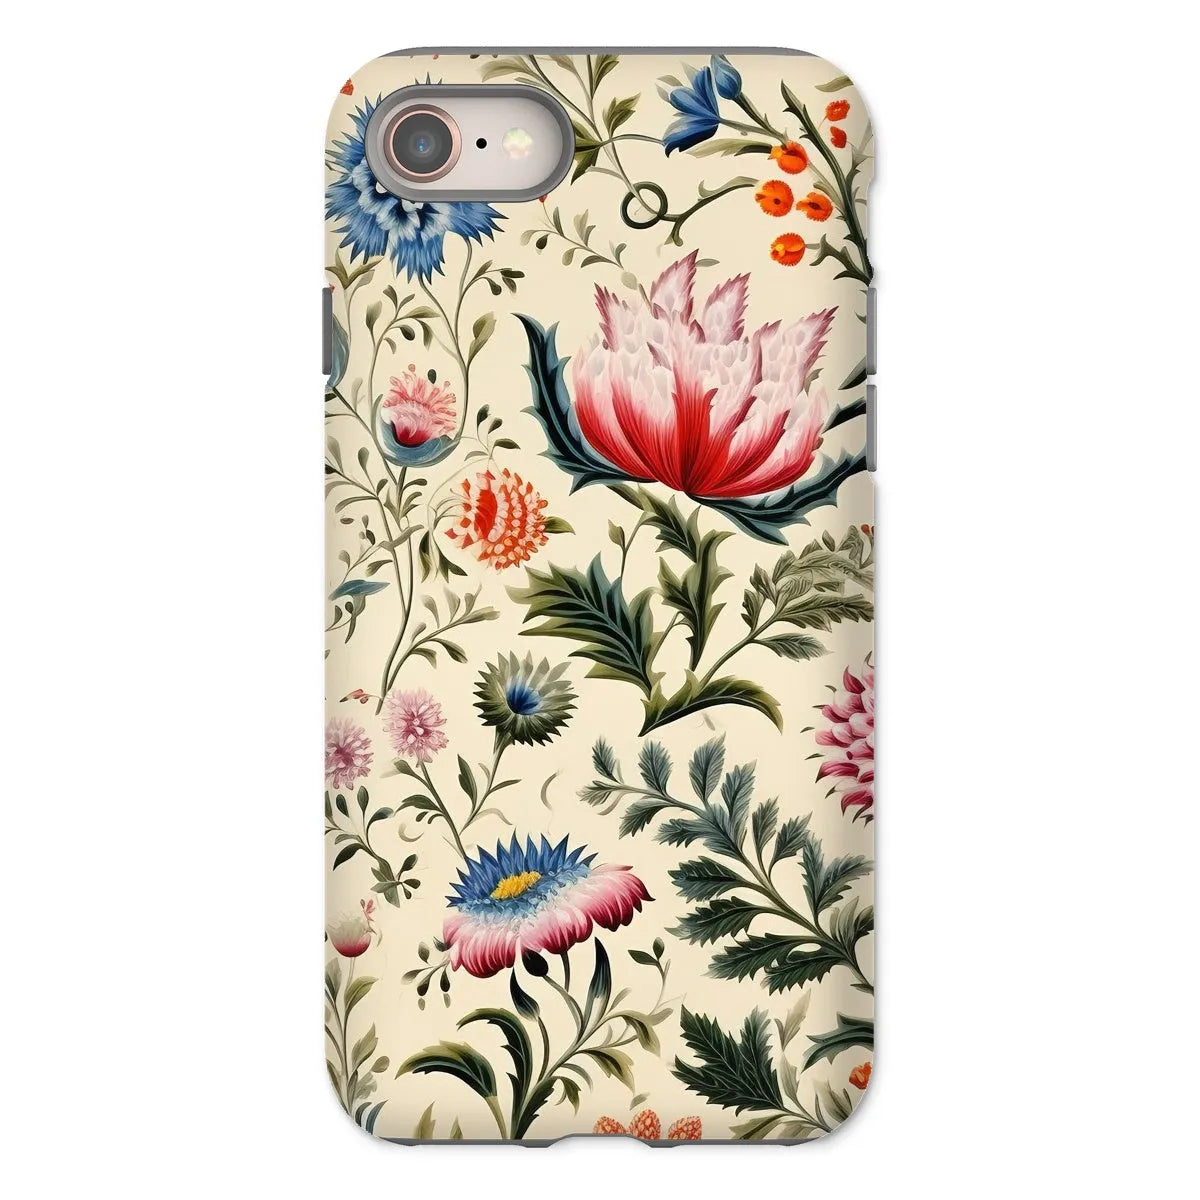 Wildflower Hoopla - Floral Garden Aesthetic Phone Case - Iphone 8 / Matte - Mobile Phone Cases - Aesthetic Art